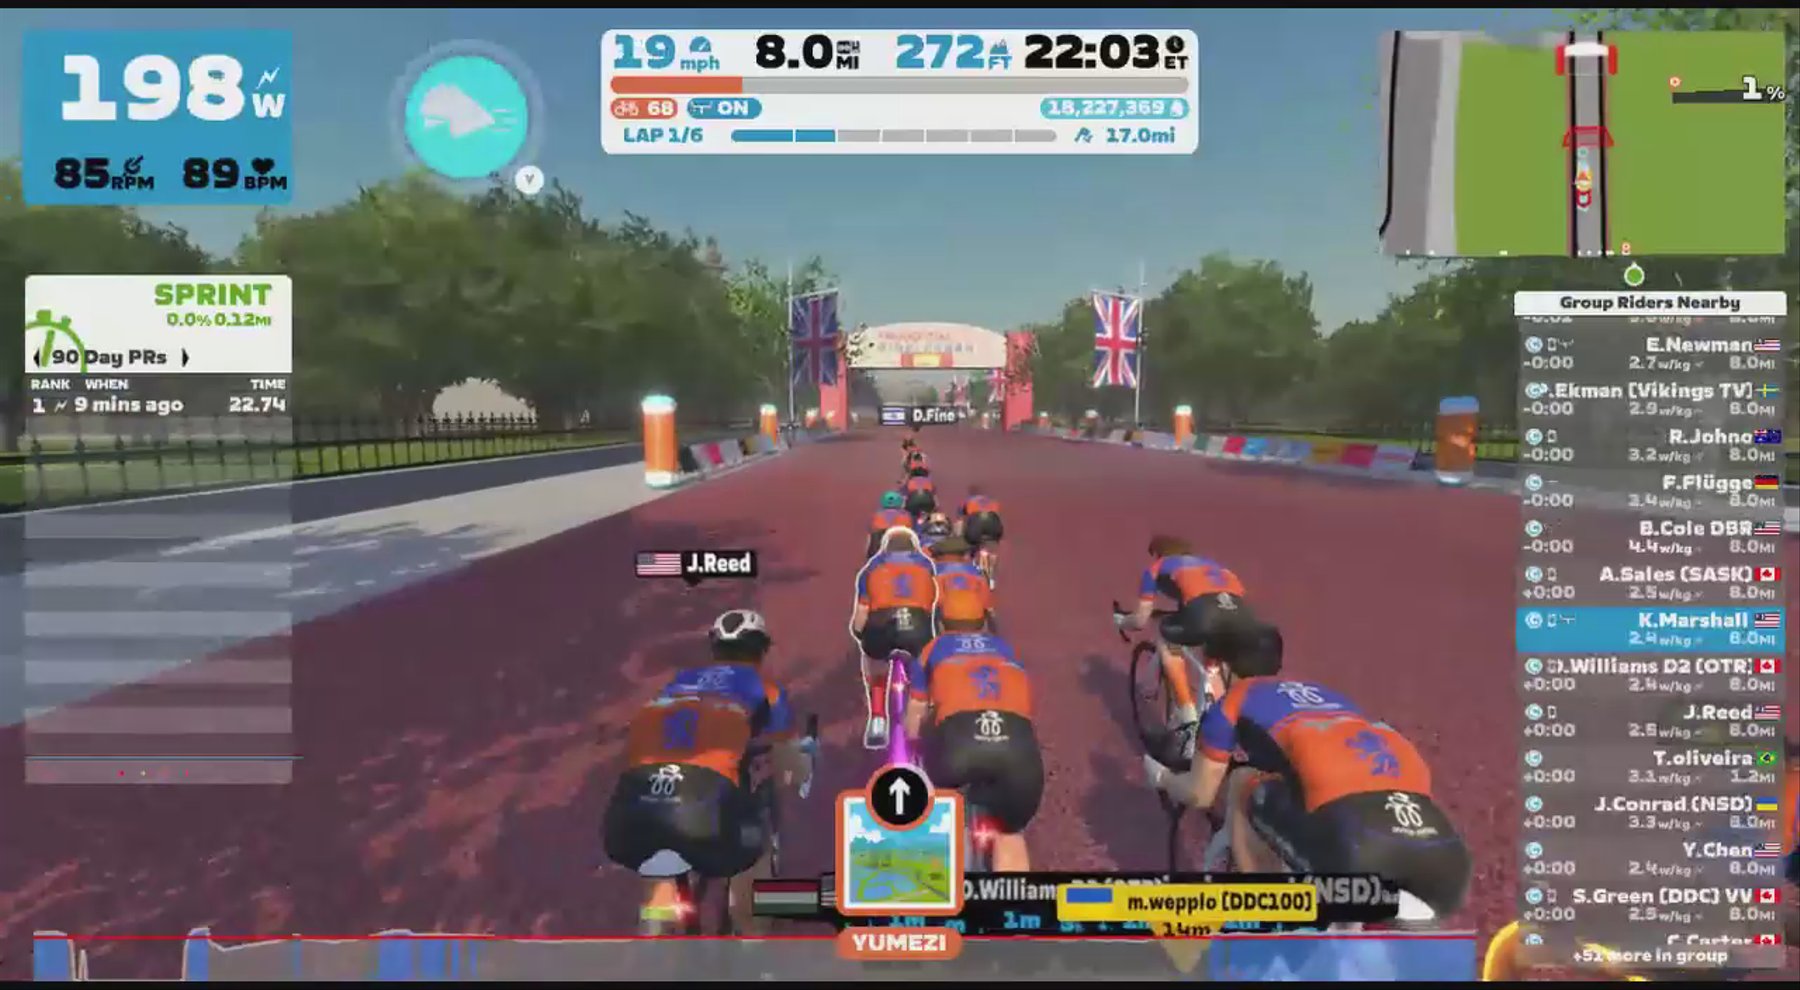 Zwift - Group Ride: Dutch Diesel Cycling Group Ride (C) on Classique Reverse in London